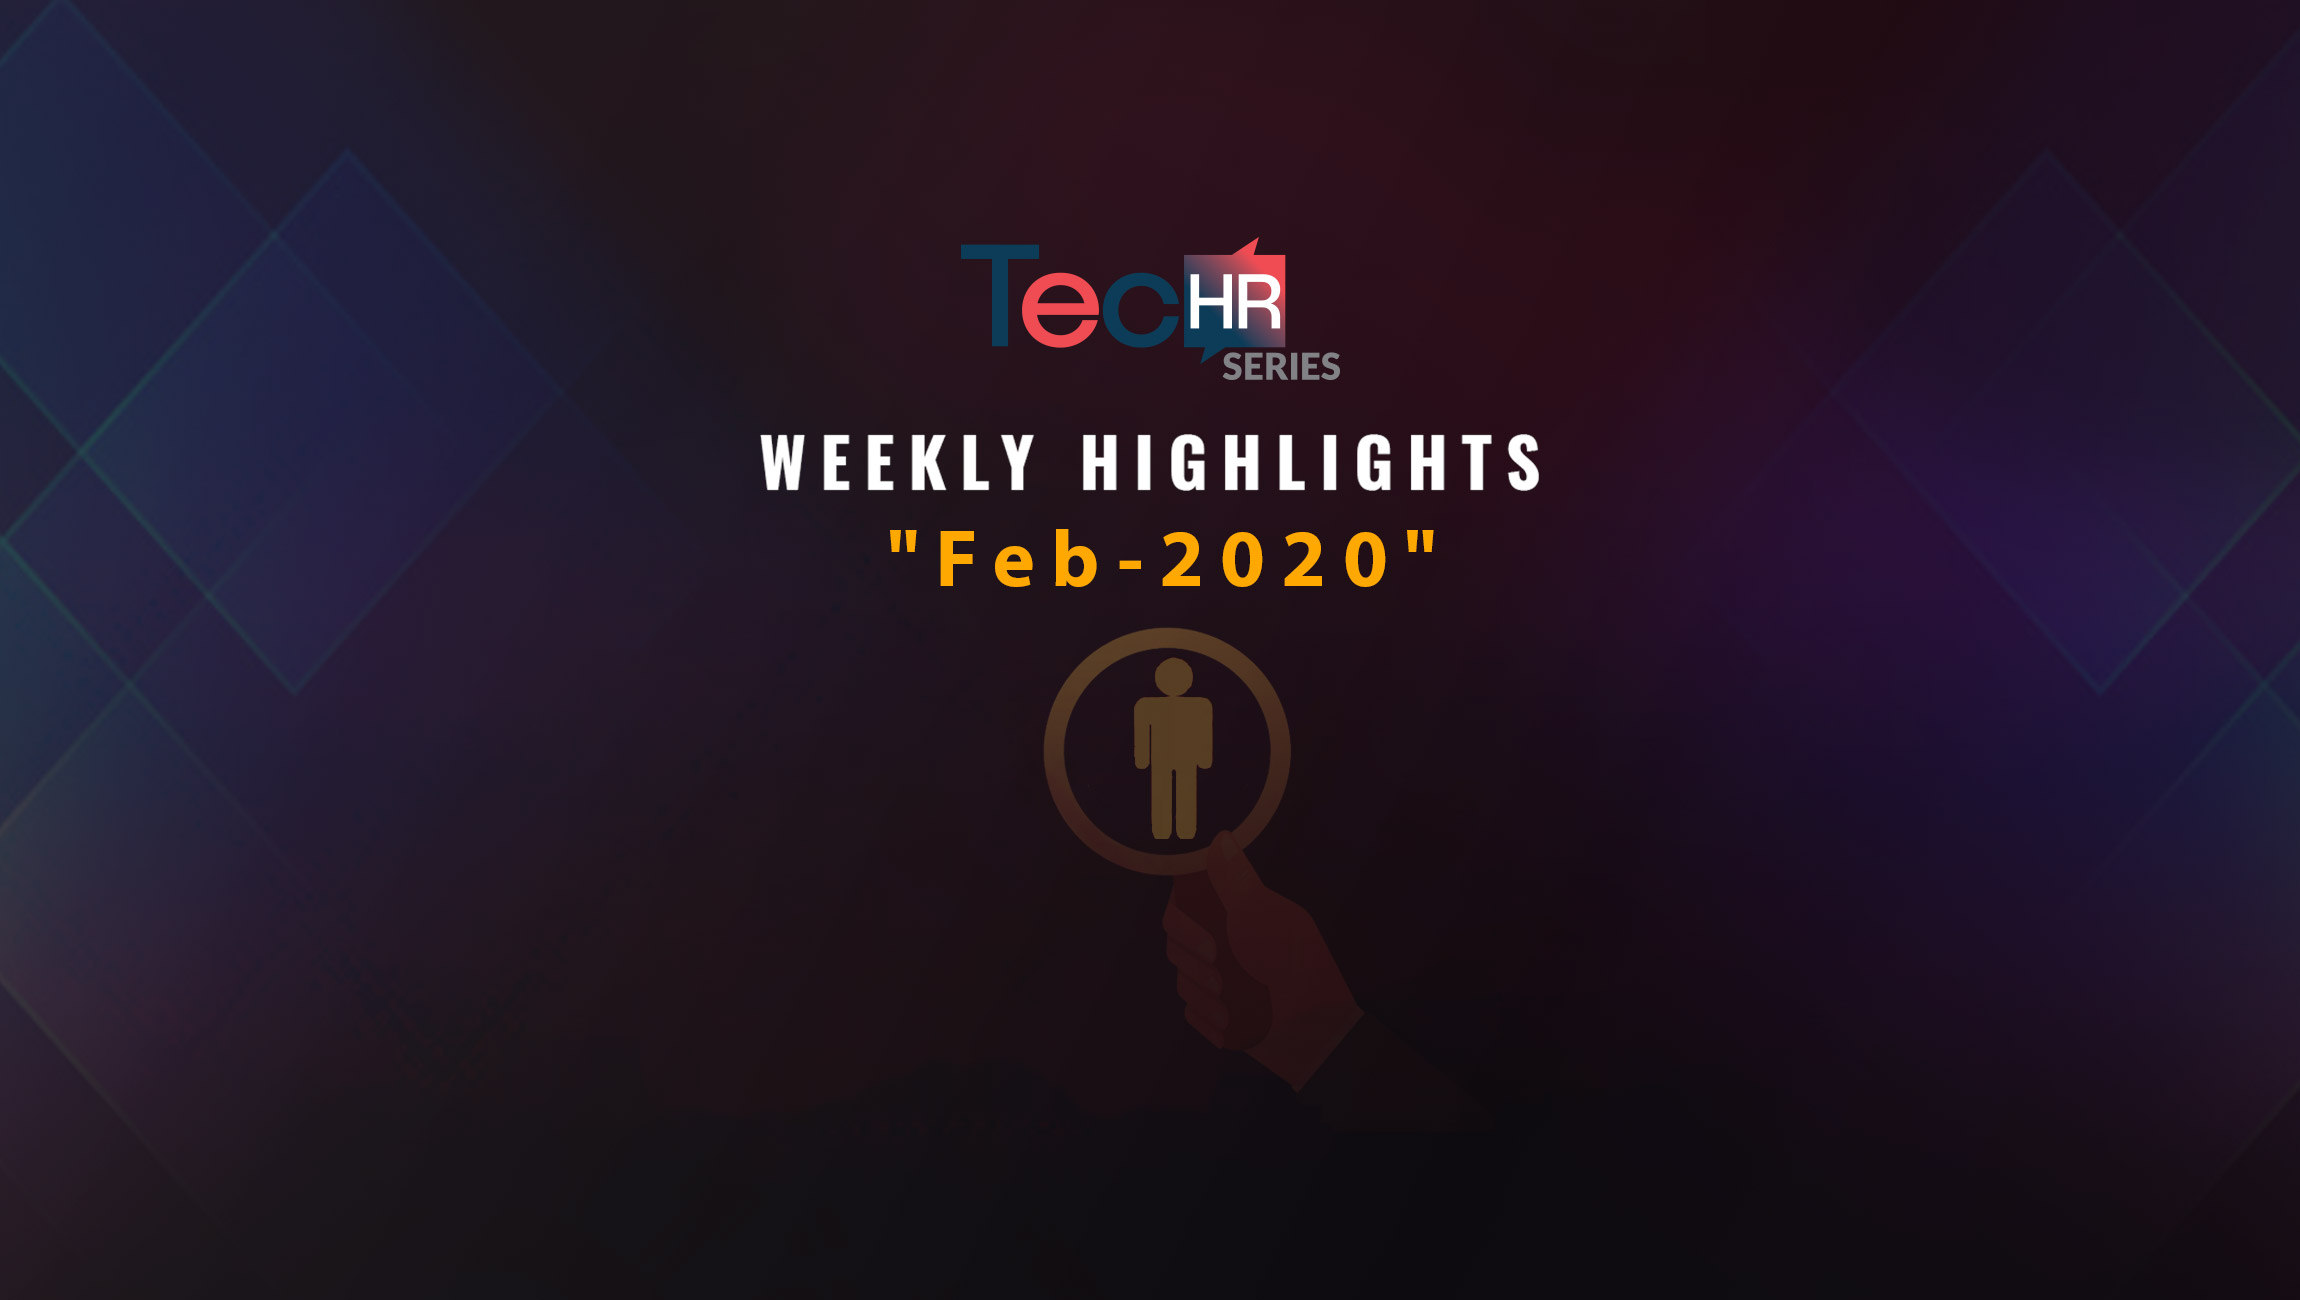 Highlights in the February 2020 Designer Collection